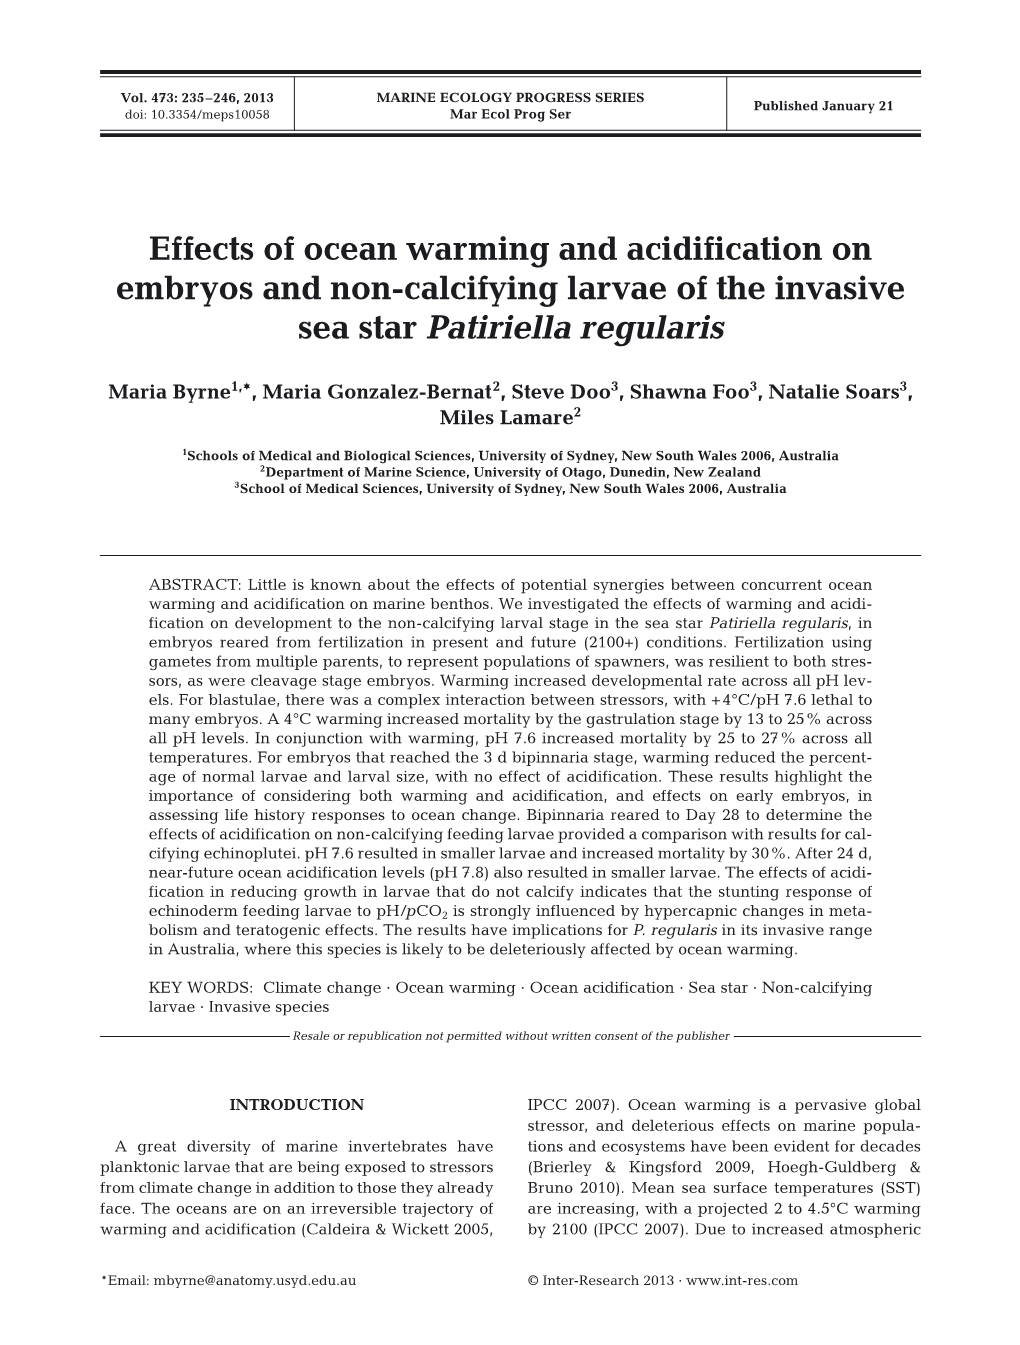 Effects of Ocean Warming and Acidification on Embryos and Non-Calcifying Larvae of the Invasive Sea Star Patiriella Regularis